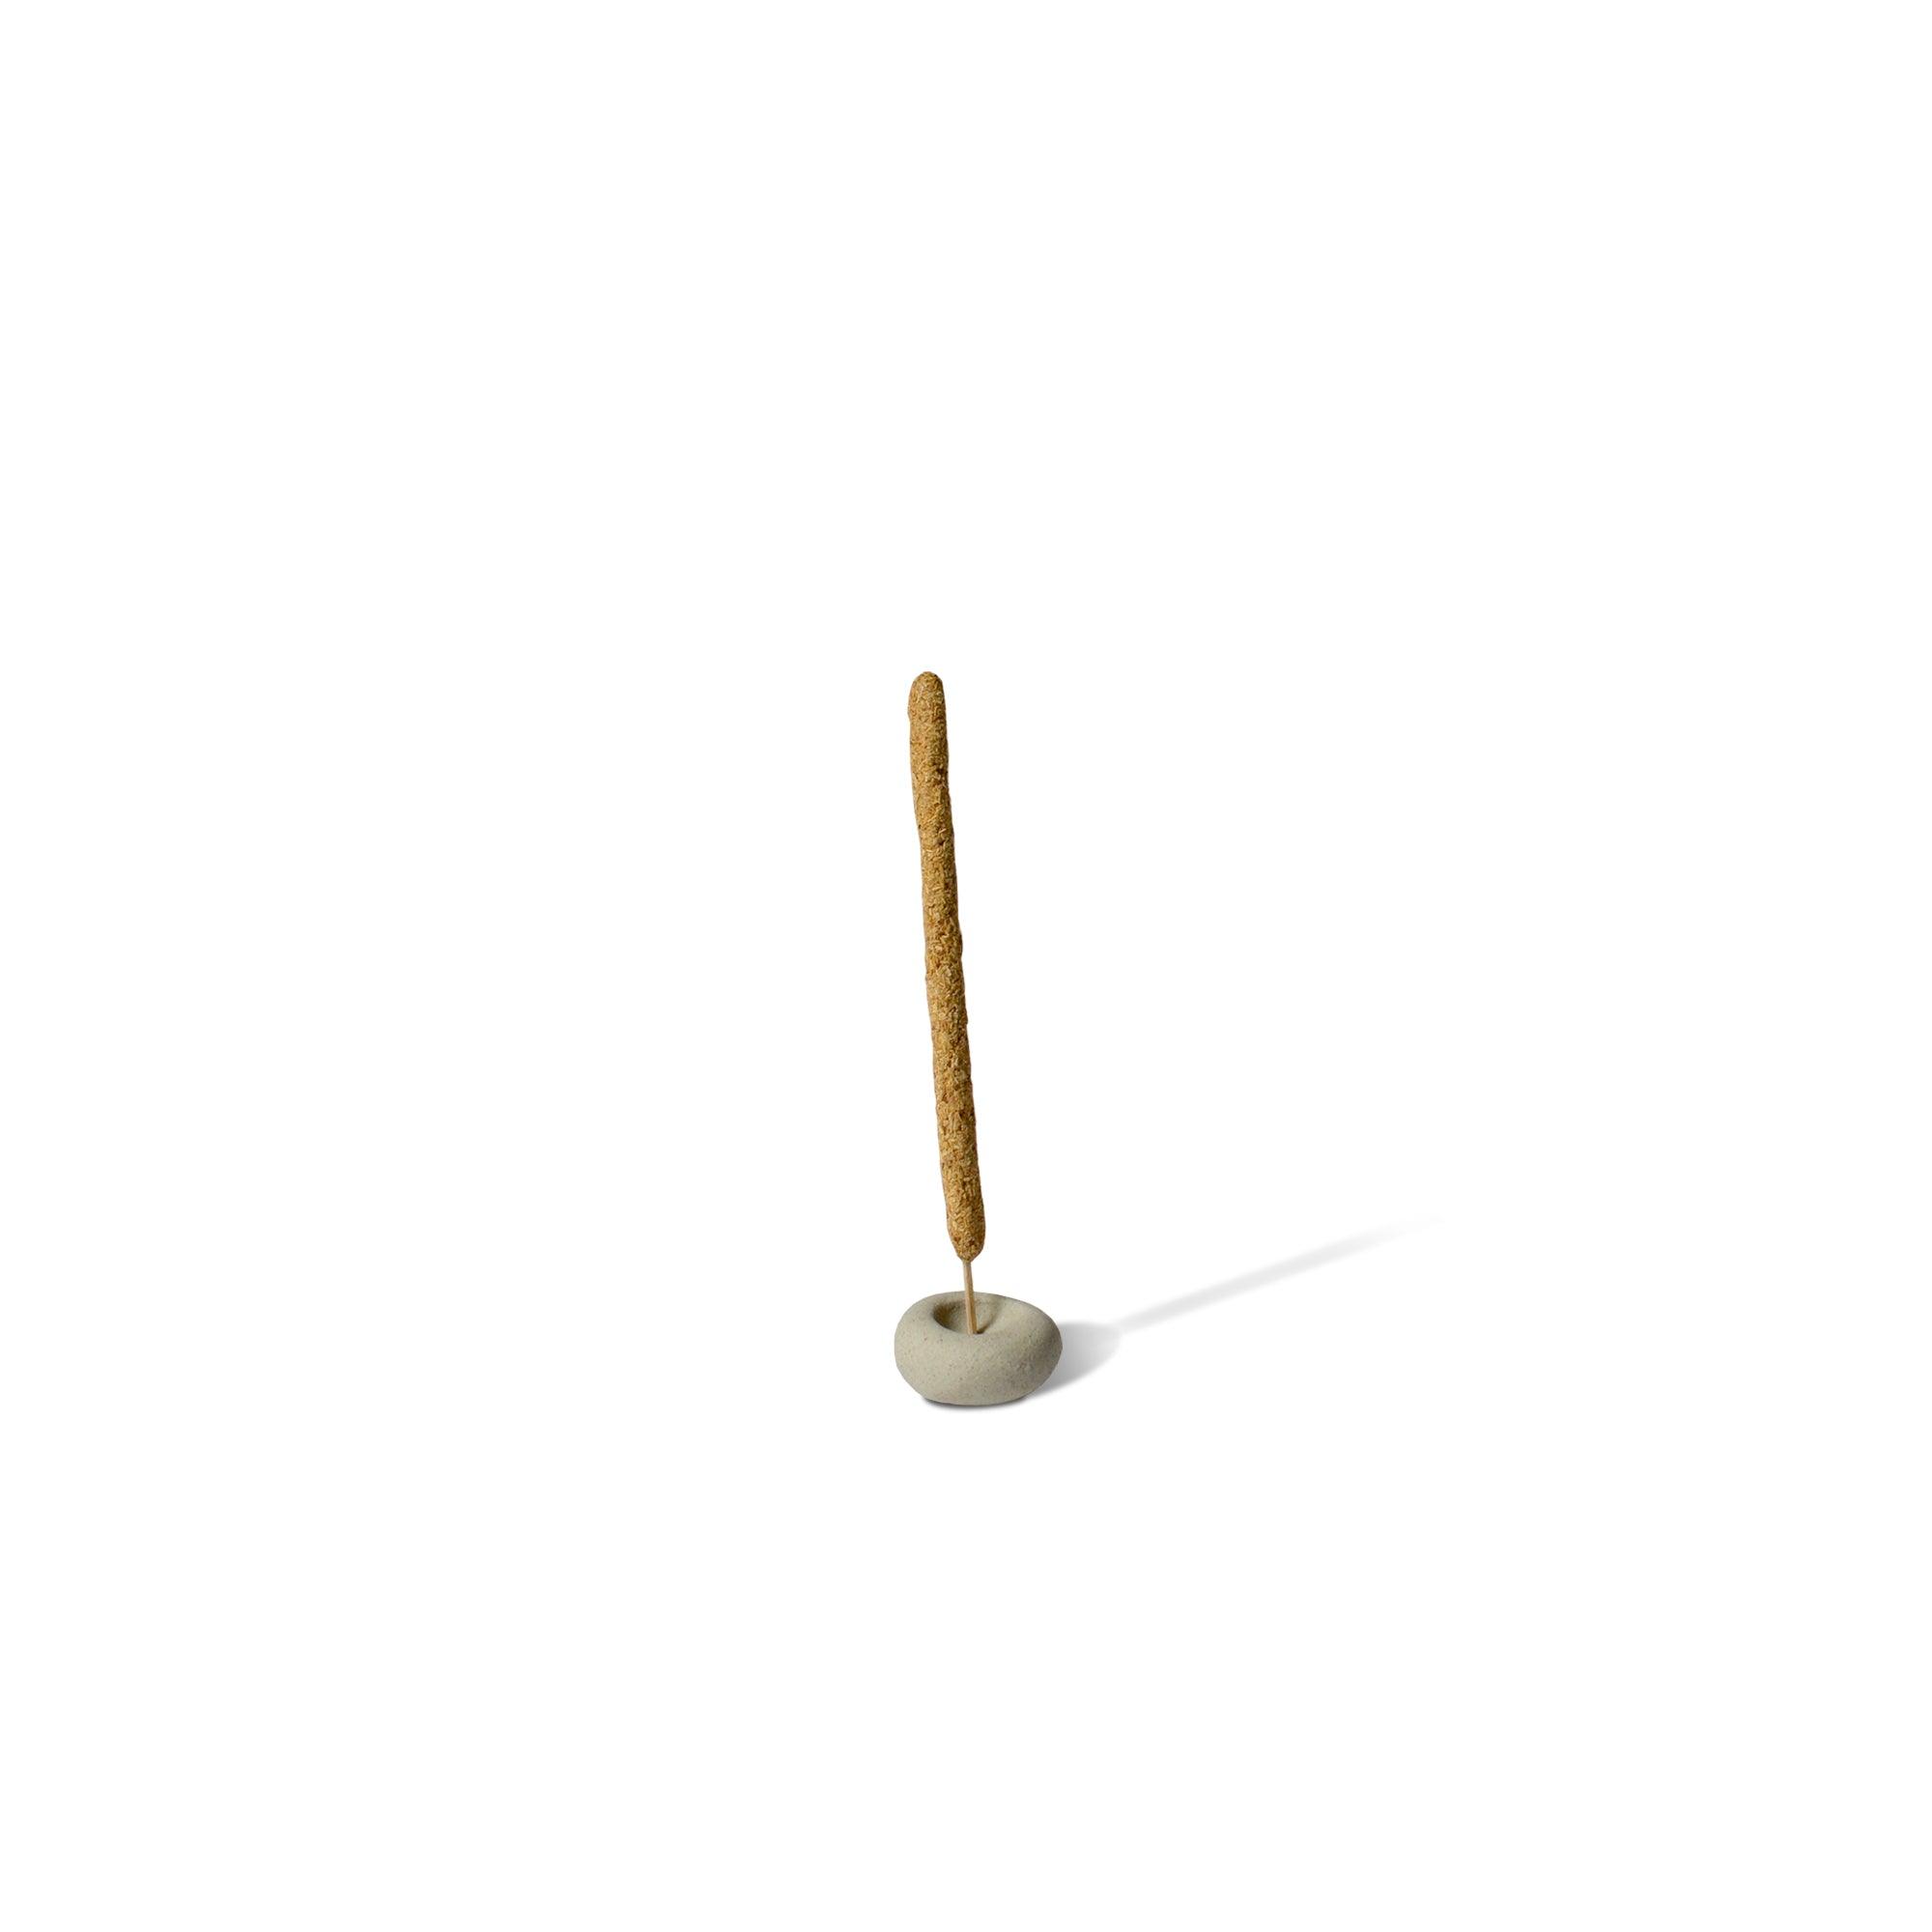 an incense stick with mini light grey ceramic pebble-shaped incense holder